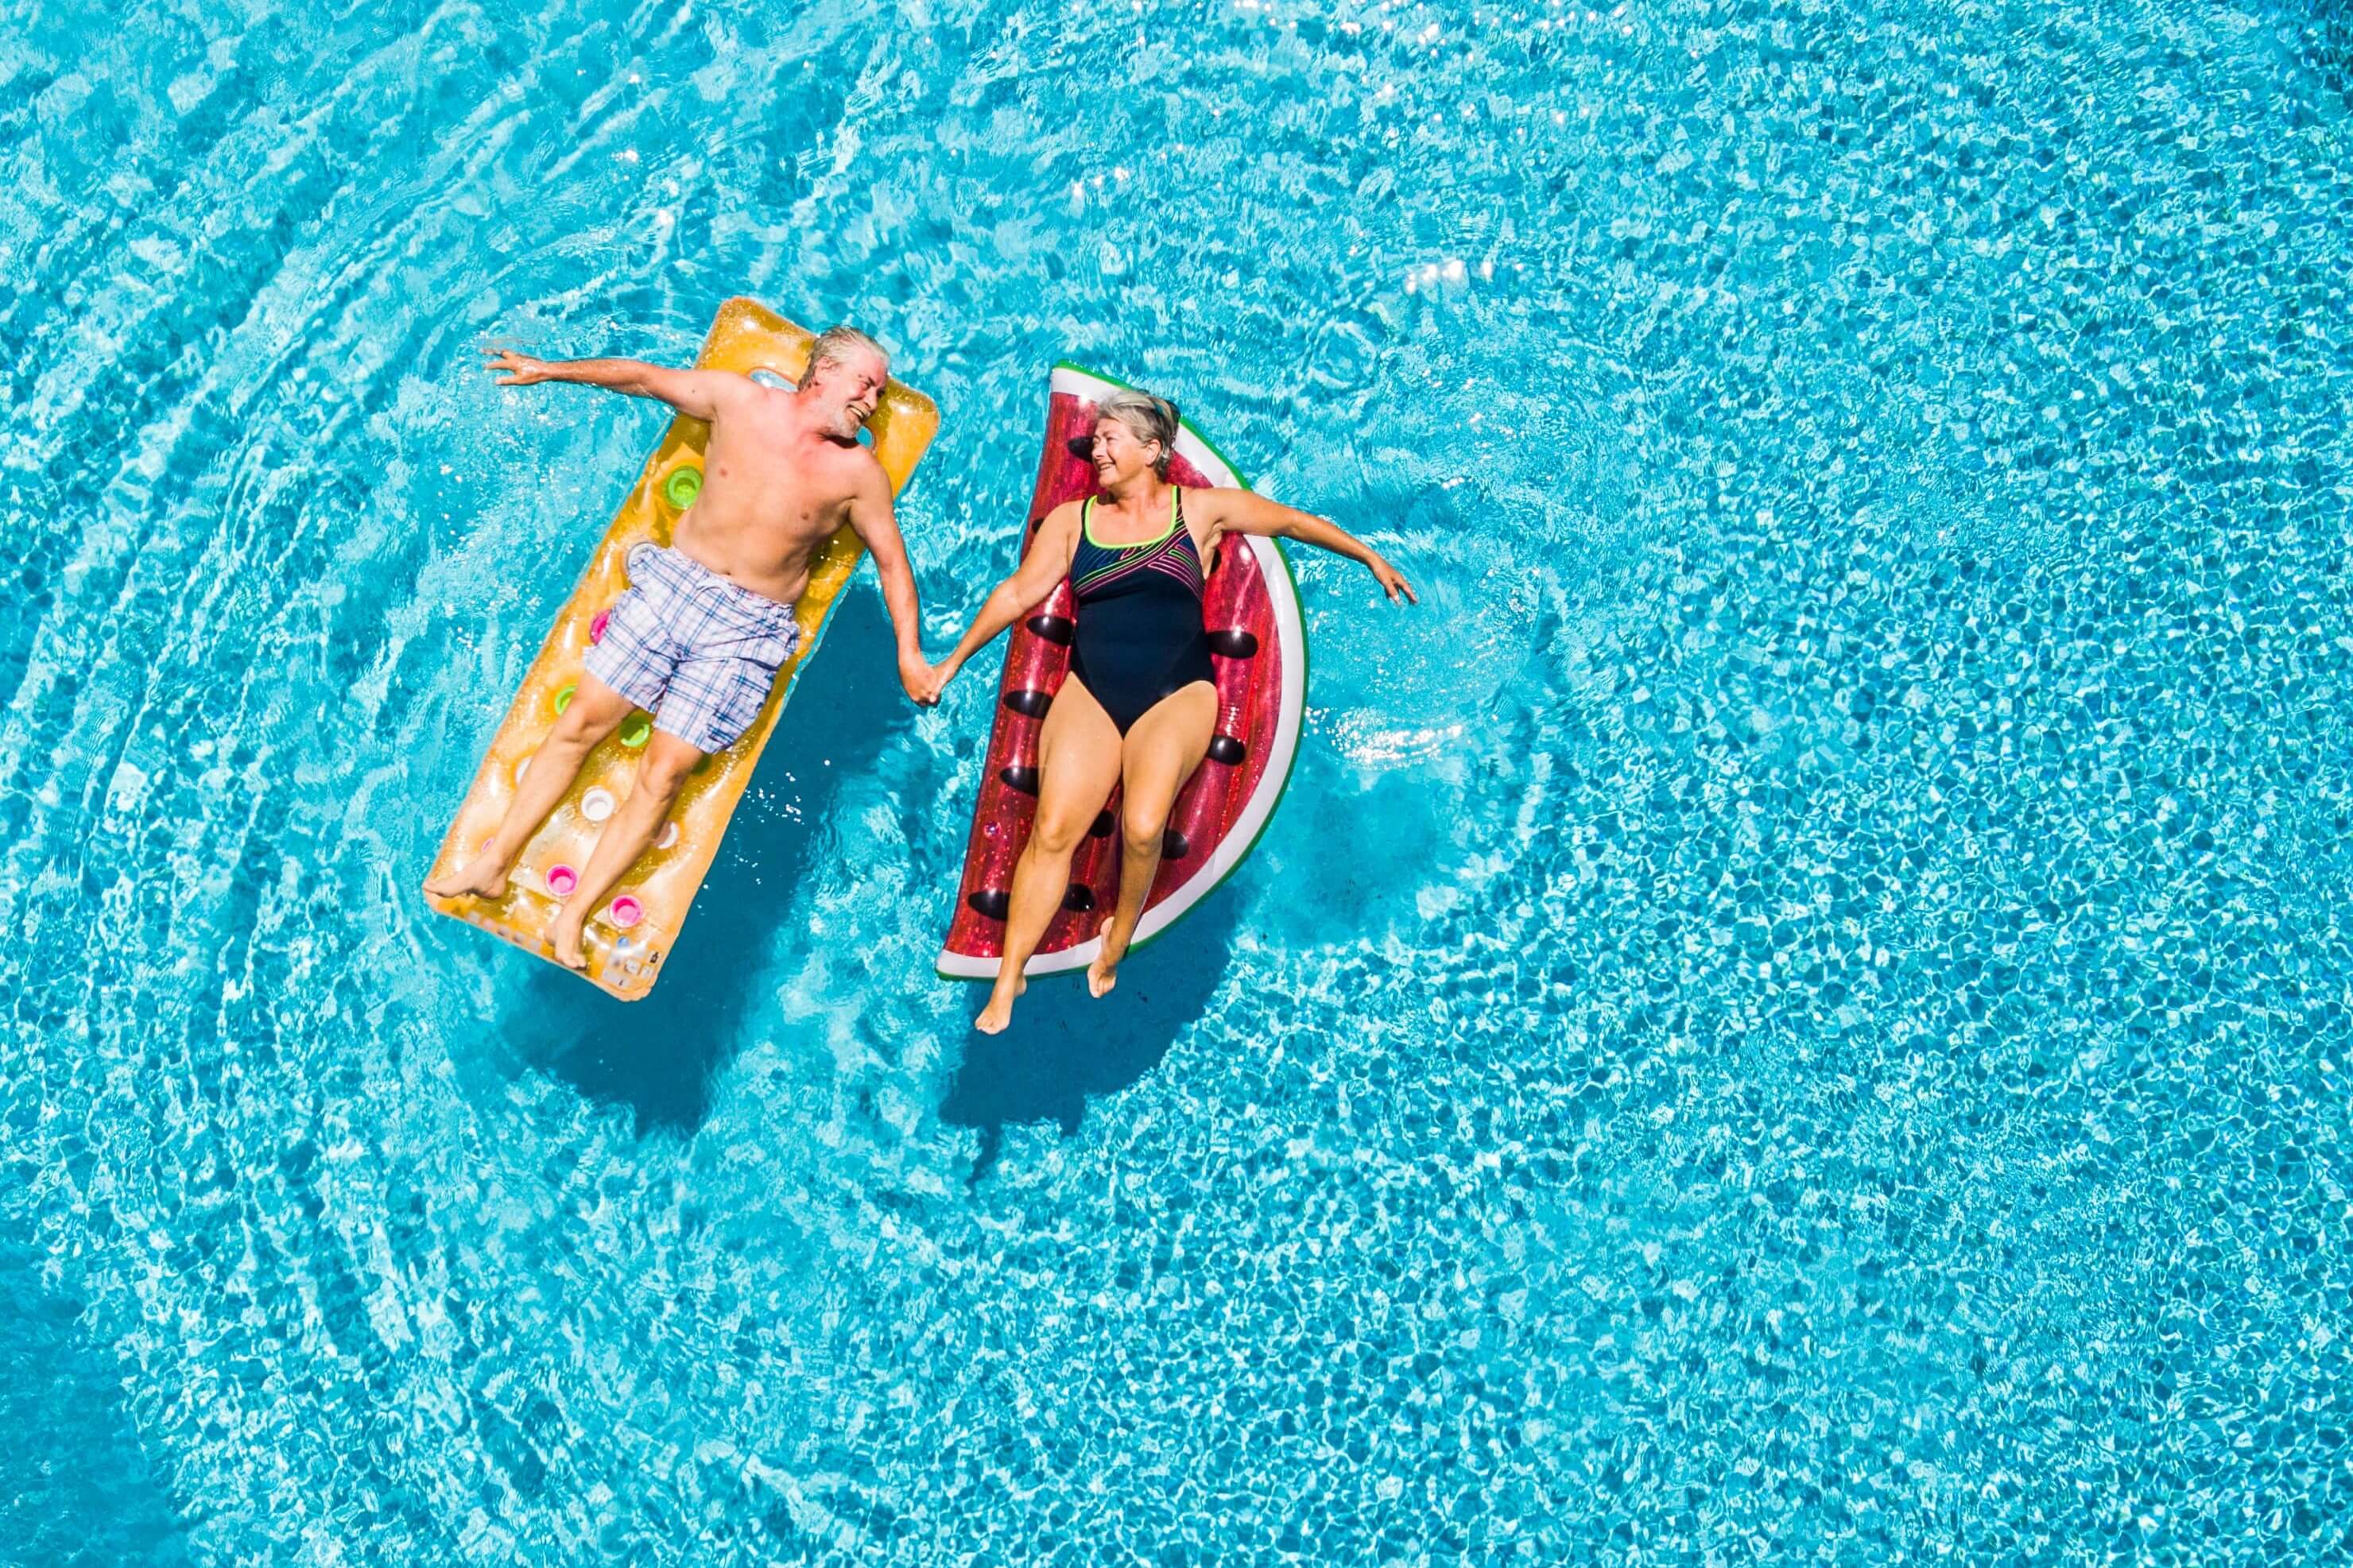 A senior couple floating on blowup beds in a swimming pool